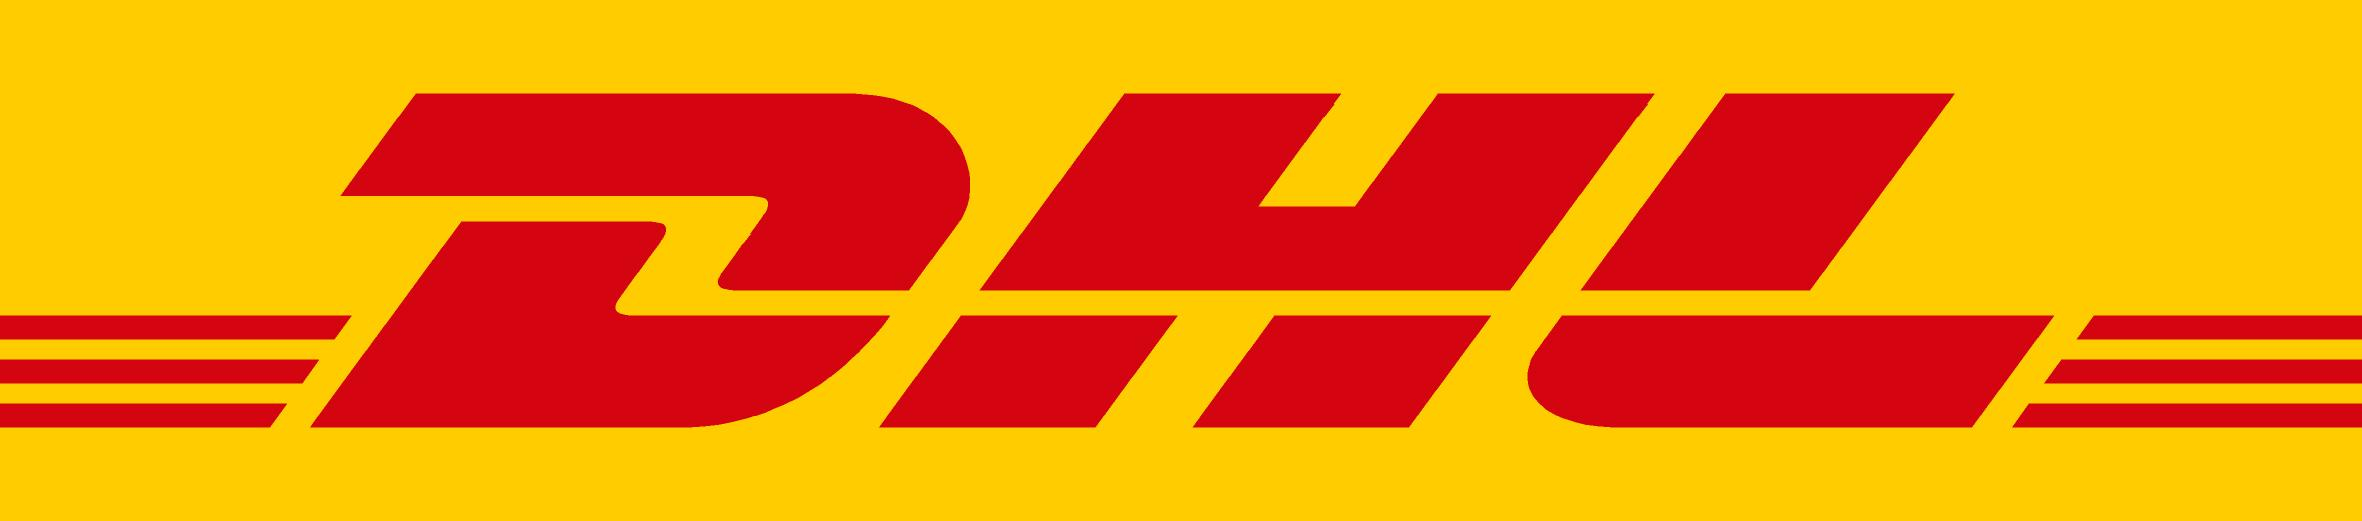 DHL Express strengthens Africa’s links with major developed economies